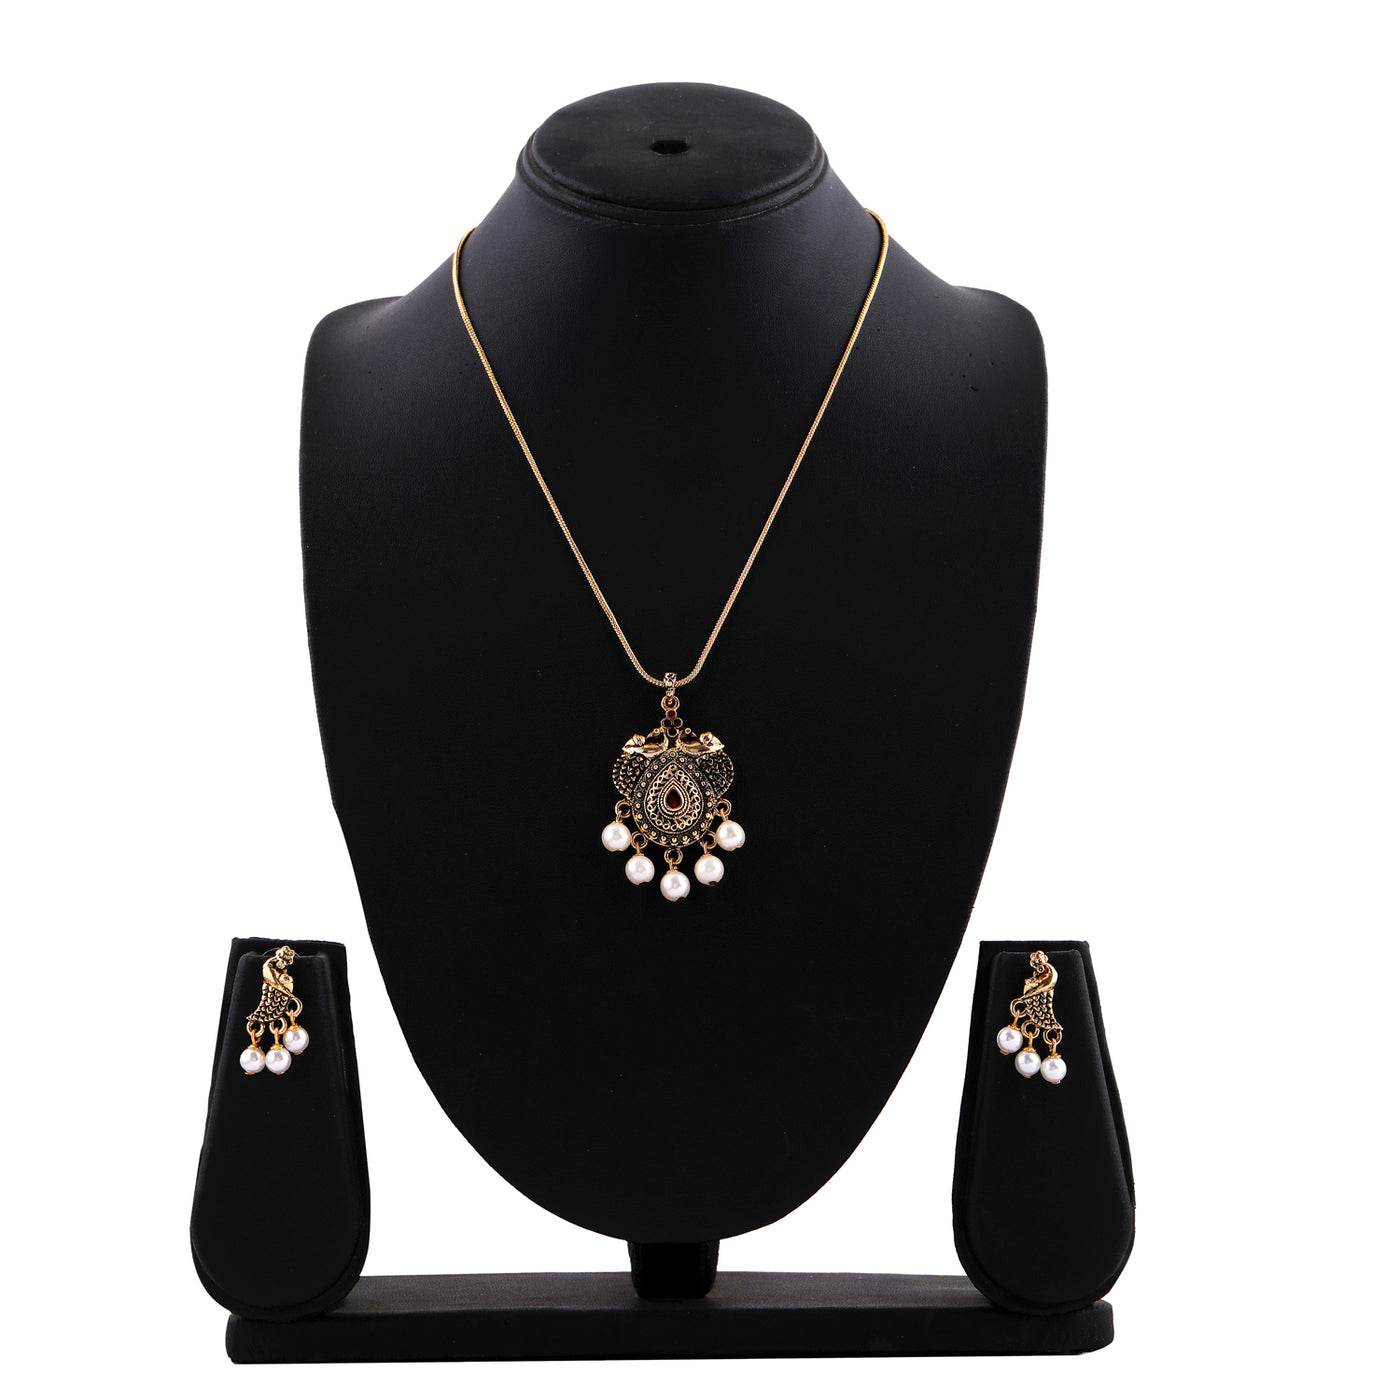 Estele 24 kt gold plated Peacock Jewellery Set for women